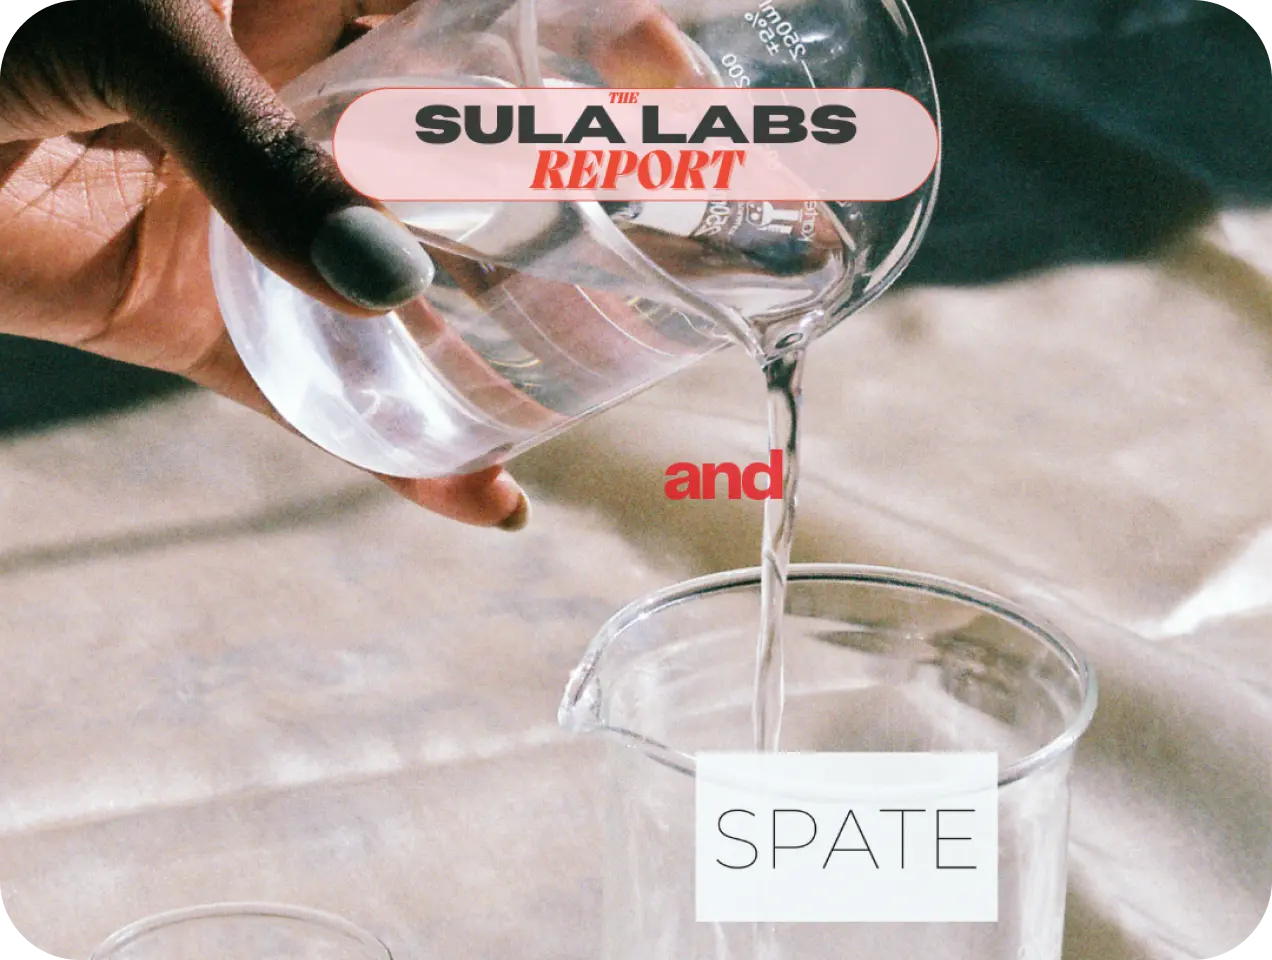 The SULA LABS Report